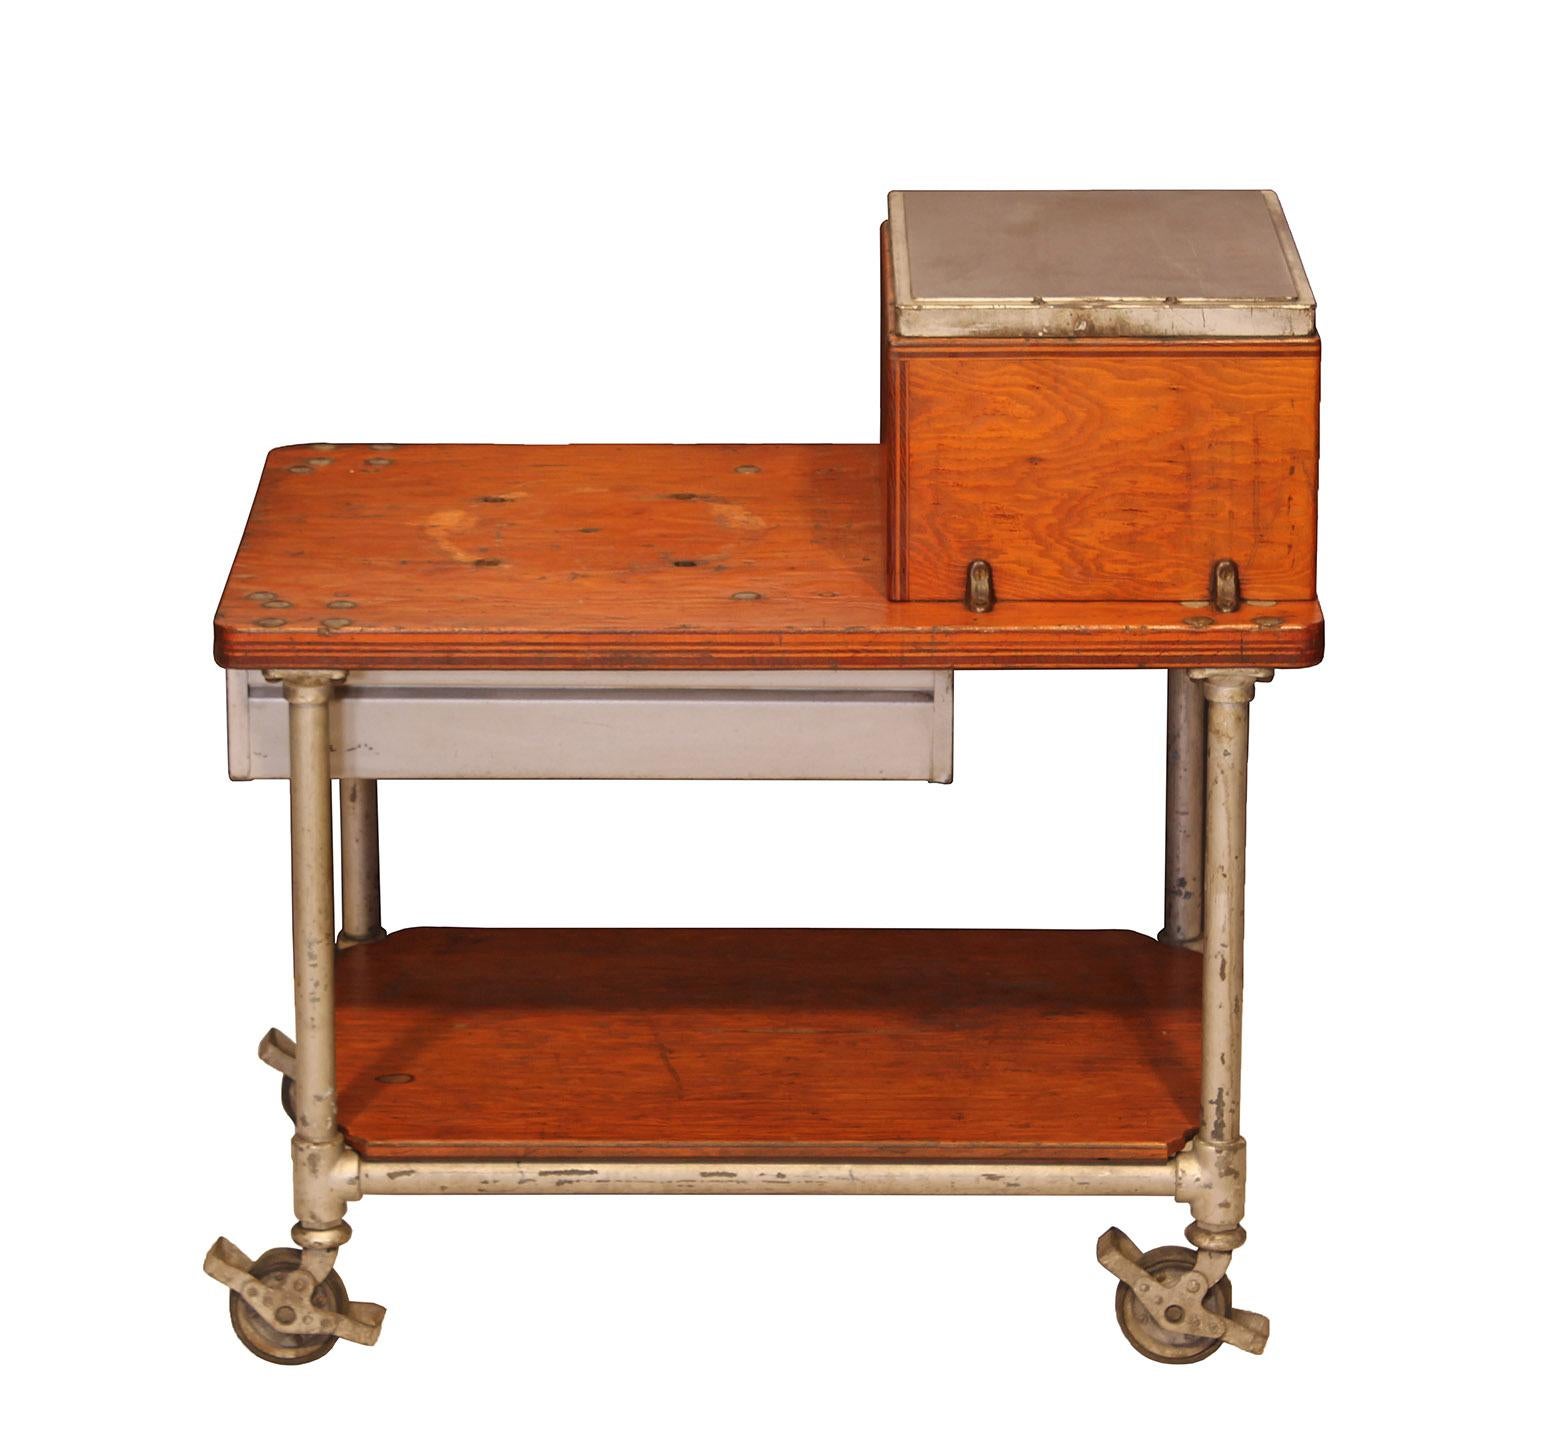 Vintage American industrial factory cart with 2 drawers and a cast-iron work surface. Made with pipe legs, frame and lockable casters. 

Dimensions: overall width 36